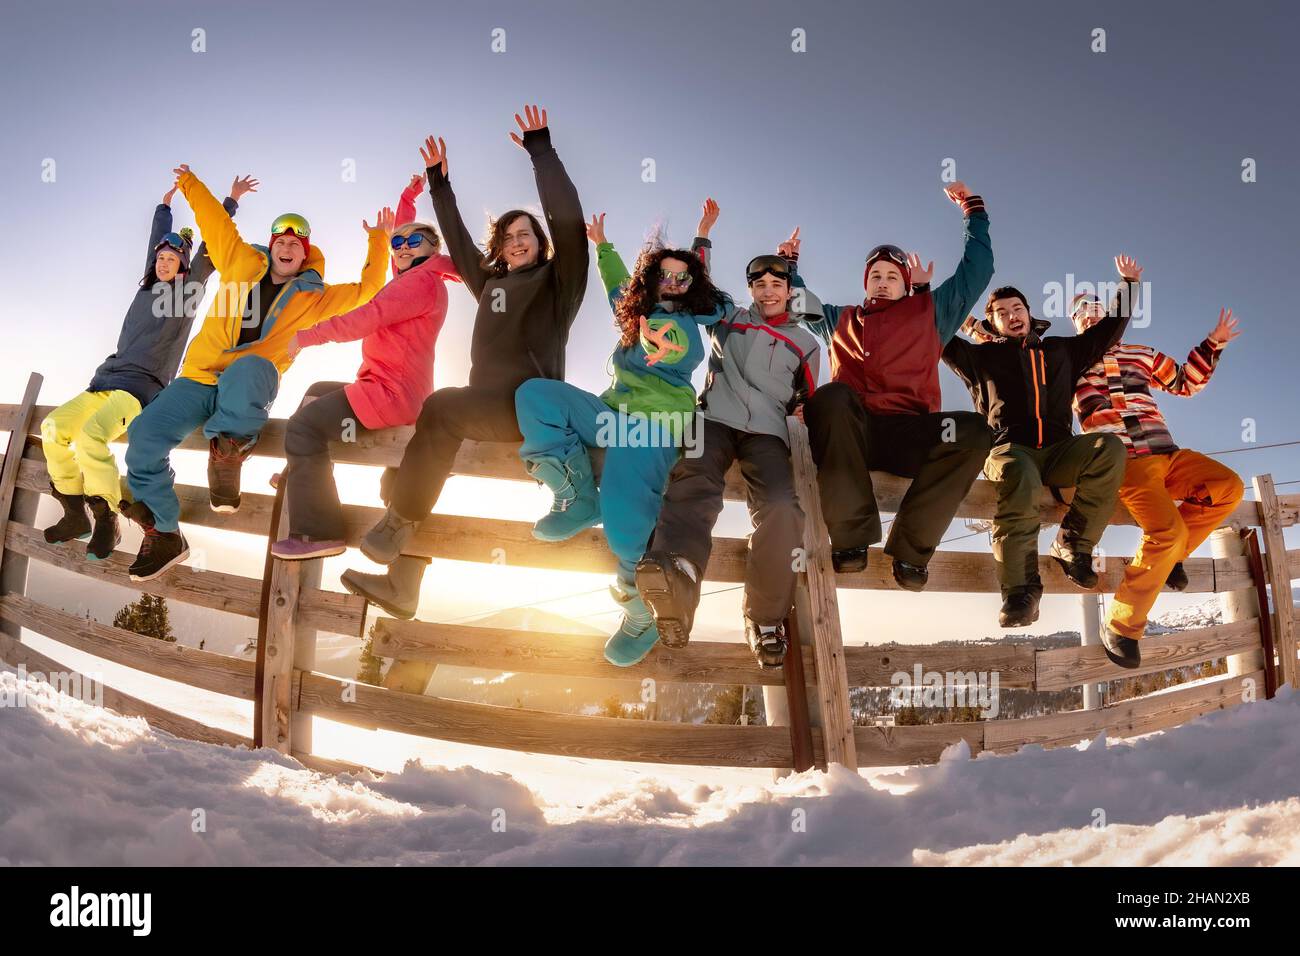 Group of happy friends skiers and snowboarders on holidays. Concept winter active sport weekend. Stock Photo